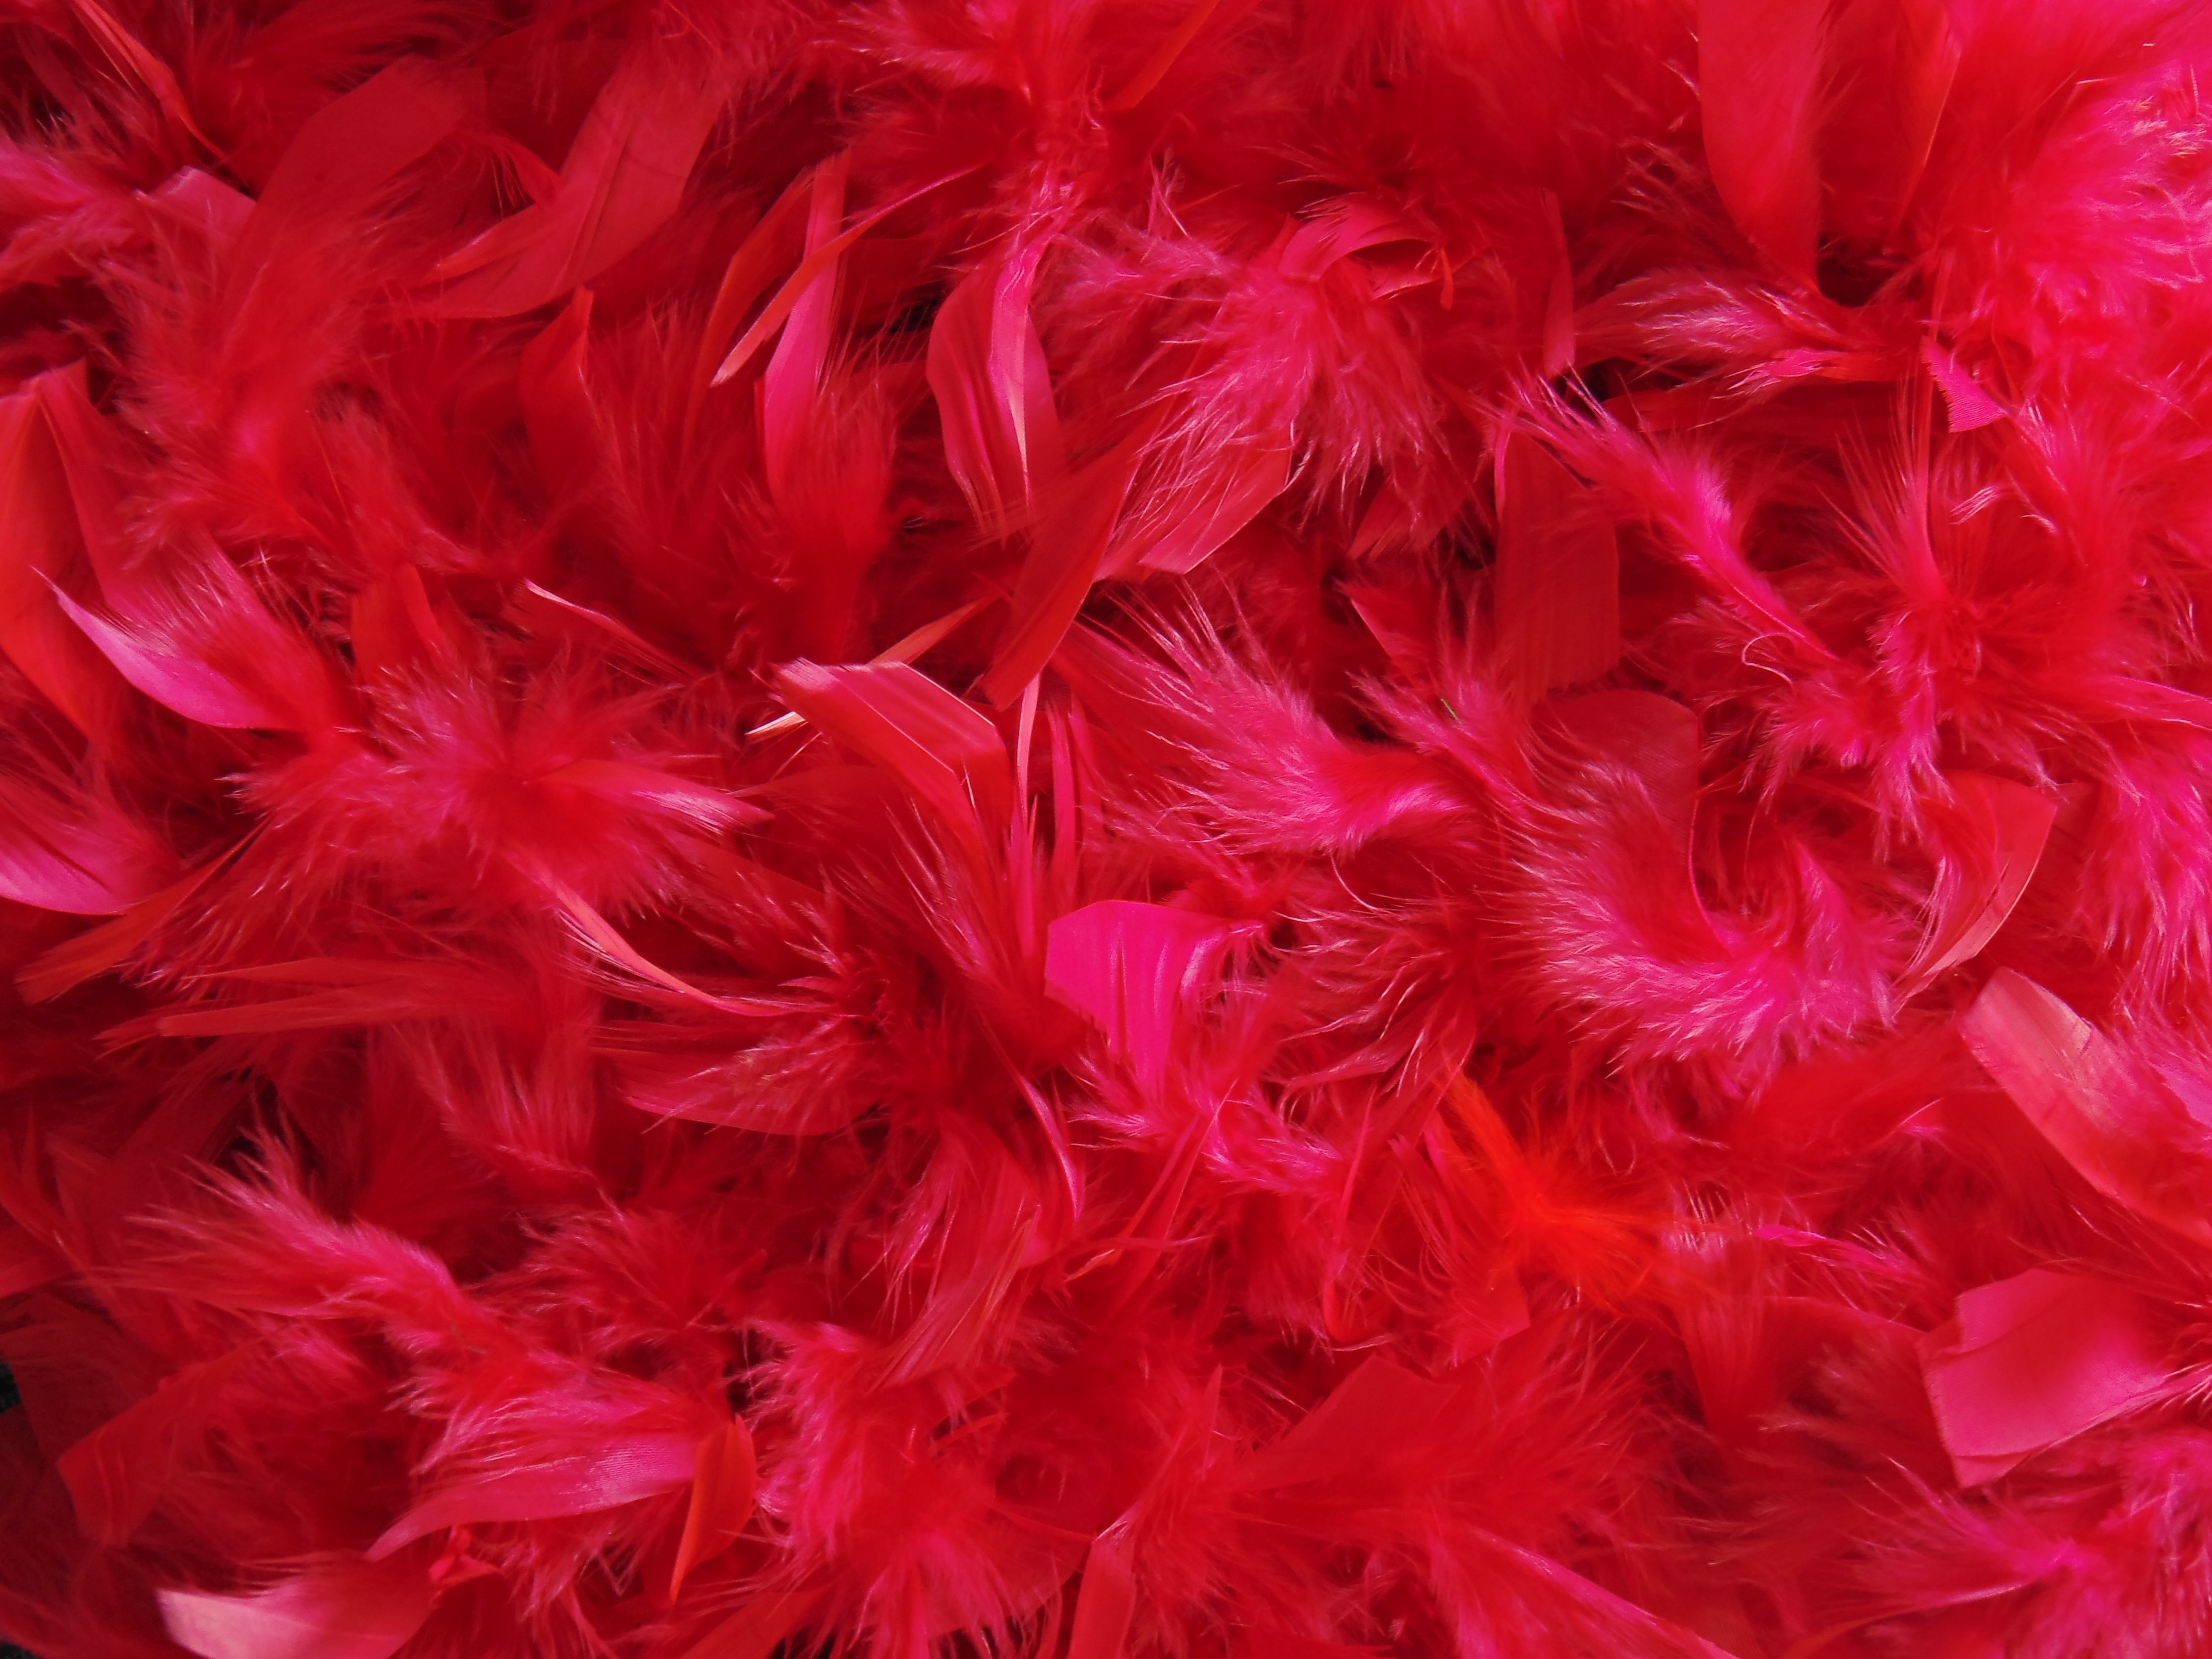 feather, fluff, miscellaneous, red, miscellanea, fuzz High Definition image